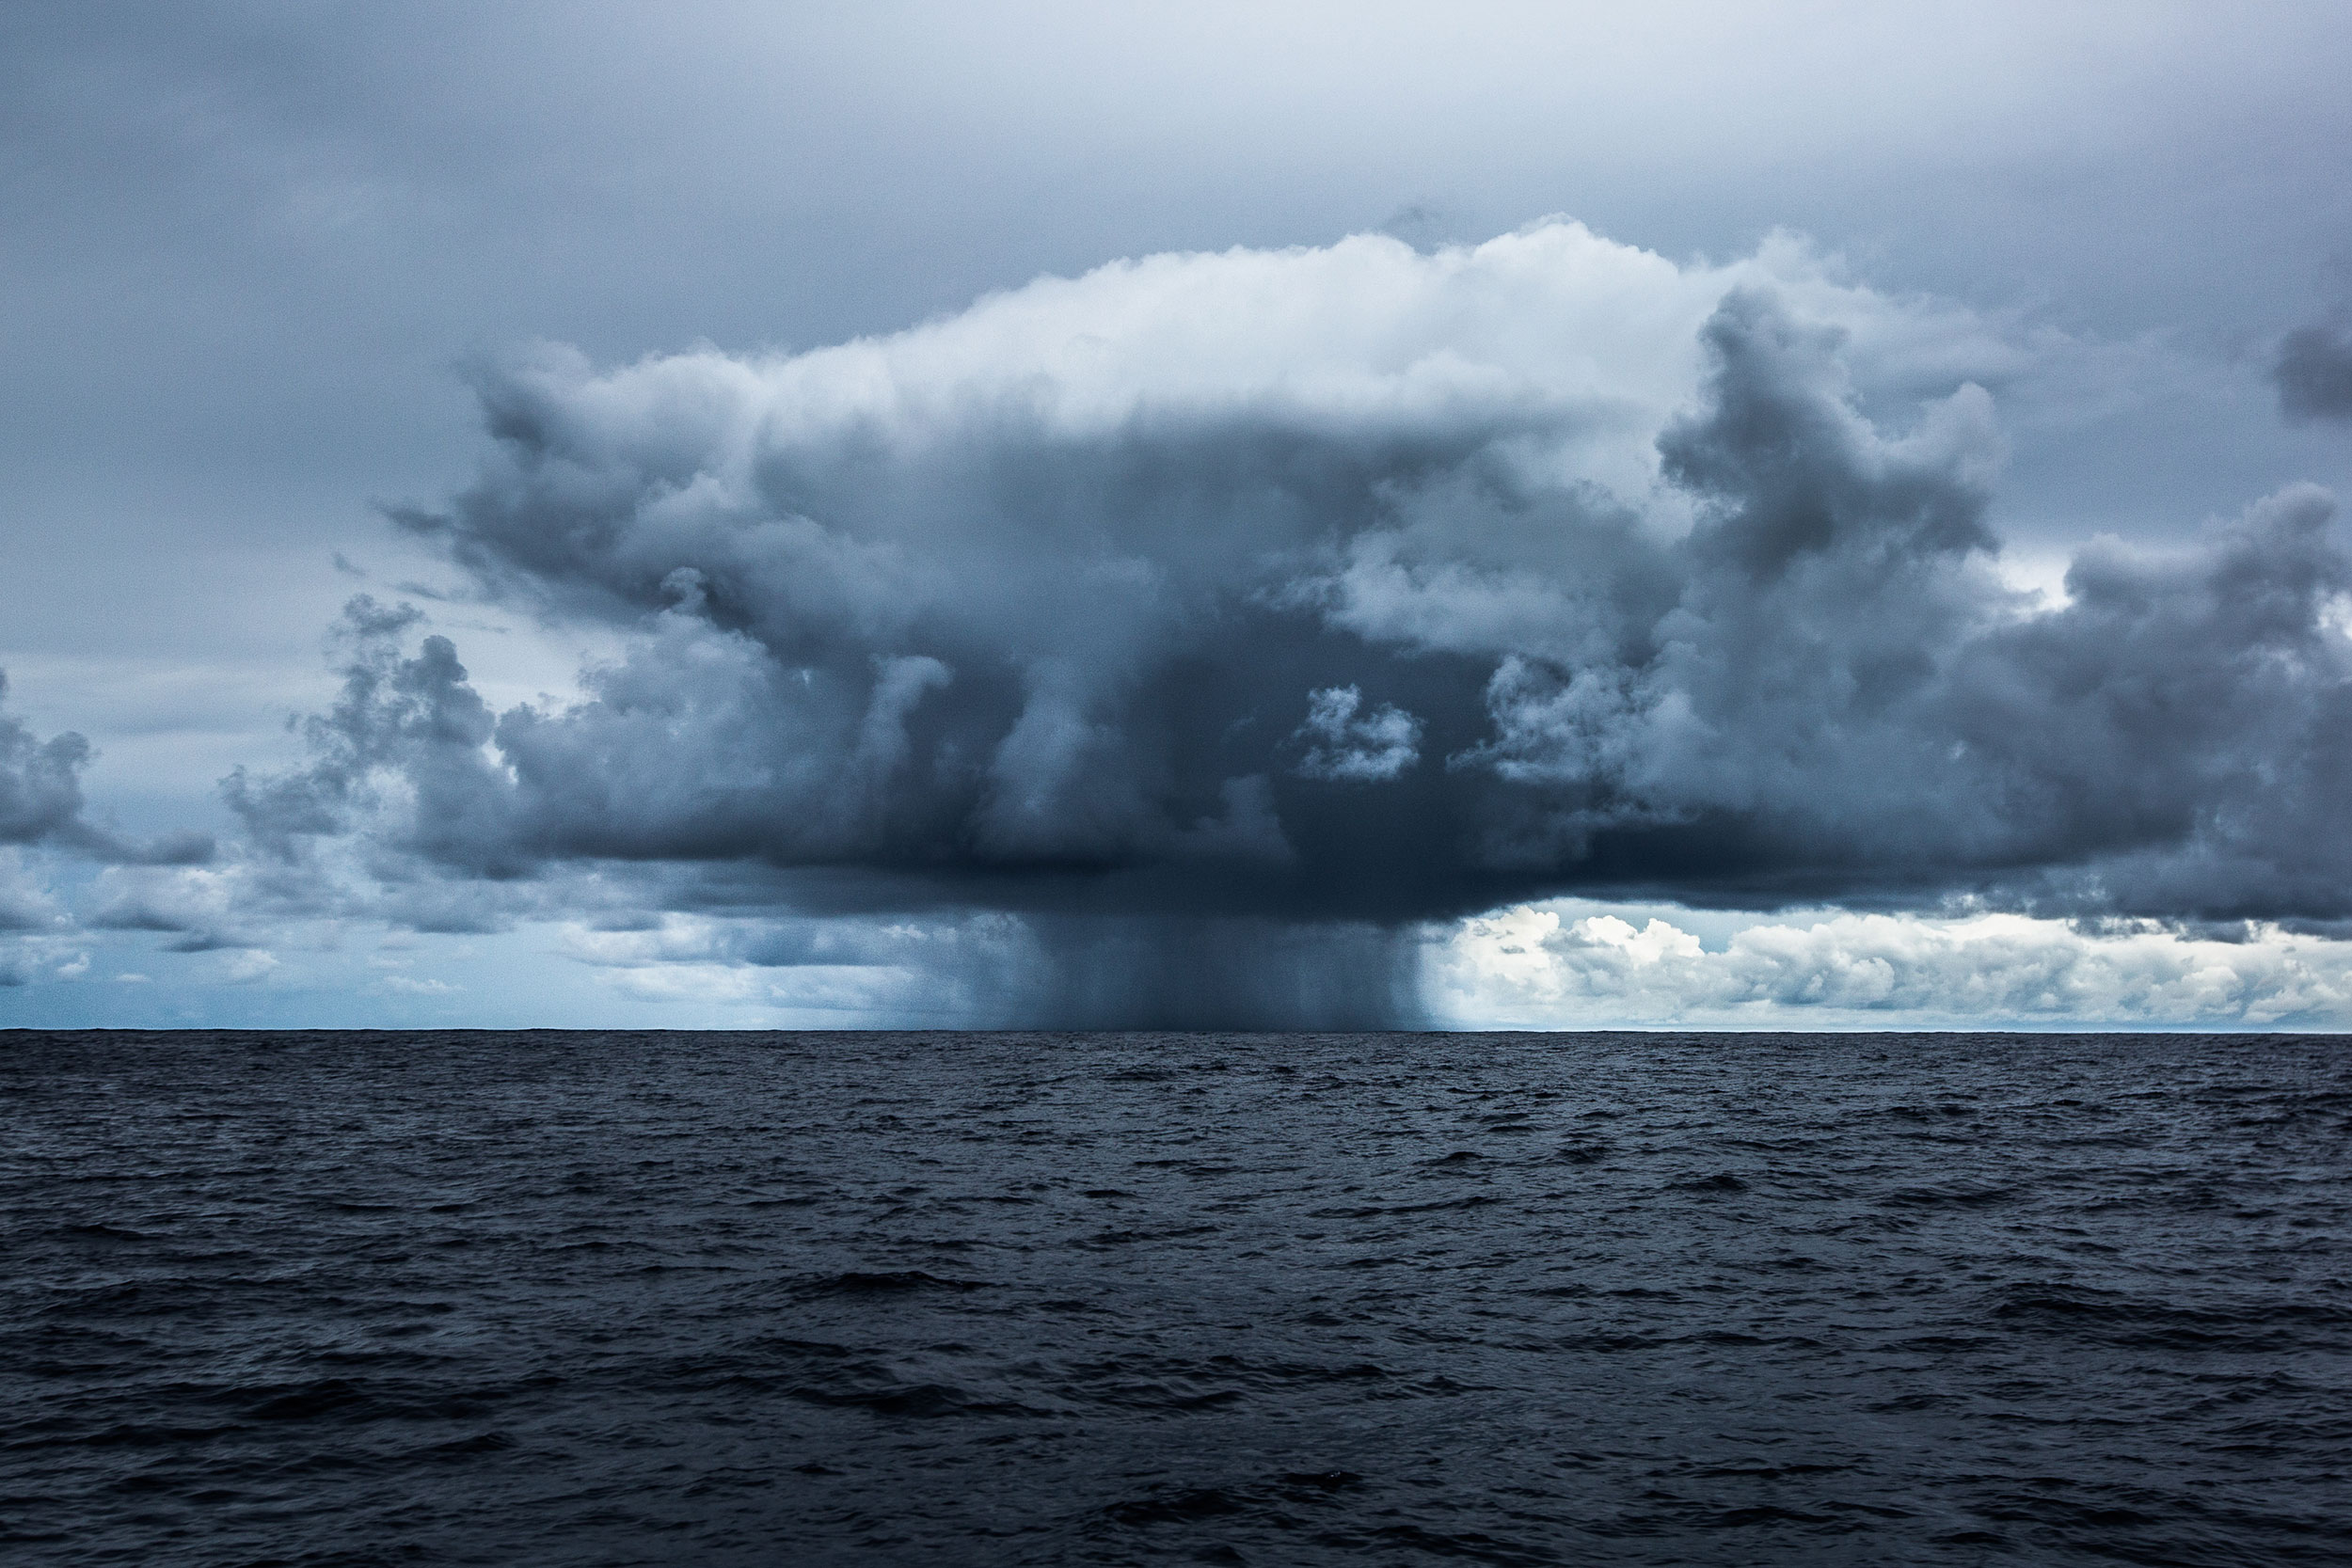 A storm cloud resembling an atomic bomb is seen during the Leg 4 Volvo Ocean Race from Sanya to Auckland in Sanya, China on Feb. 26, 2015.